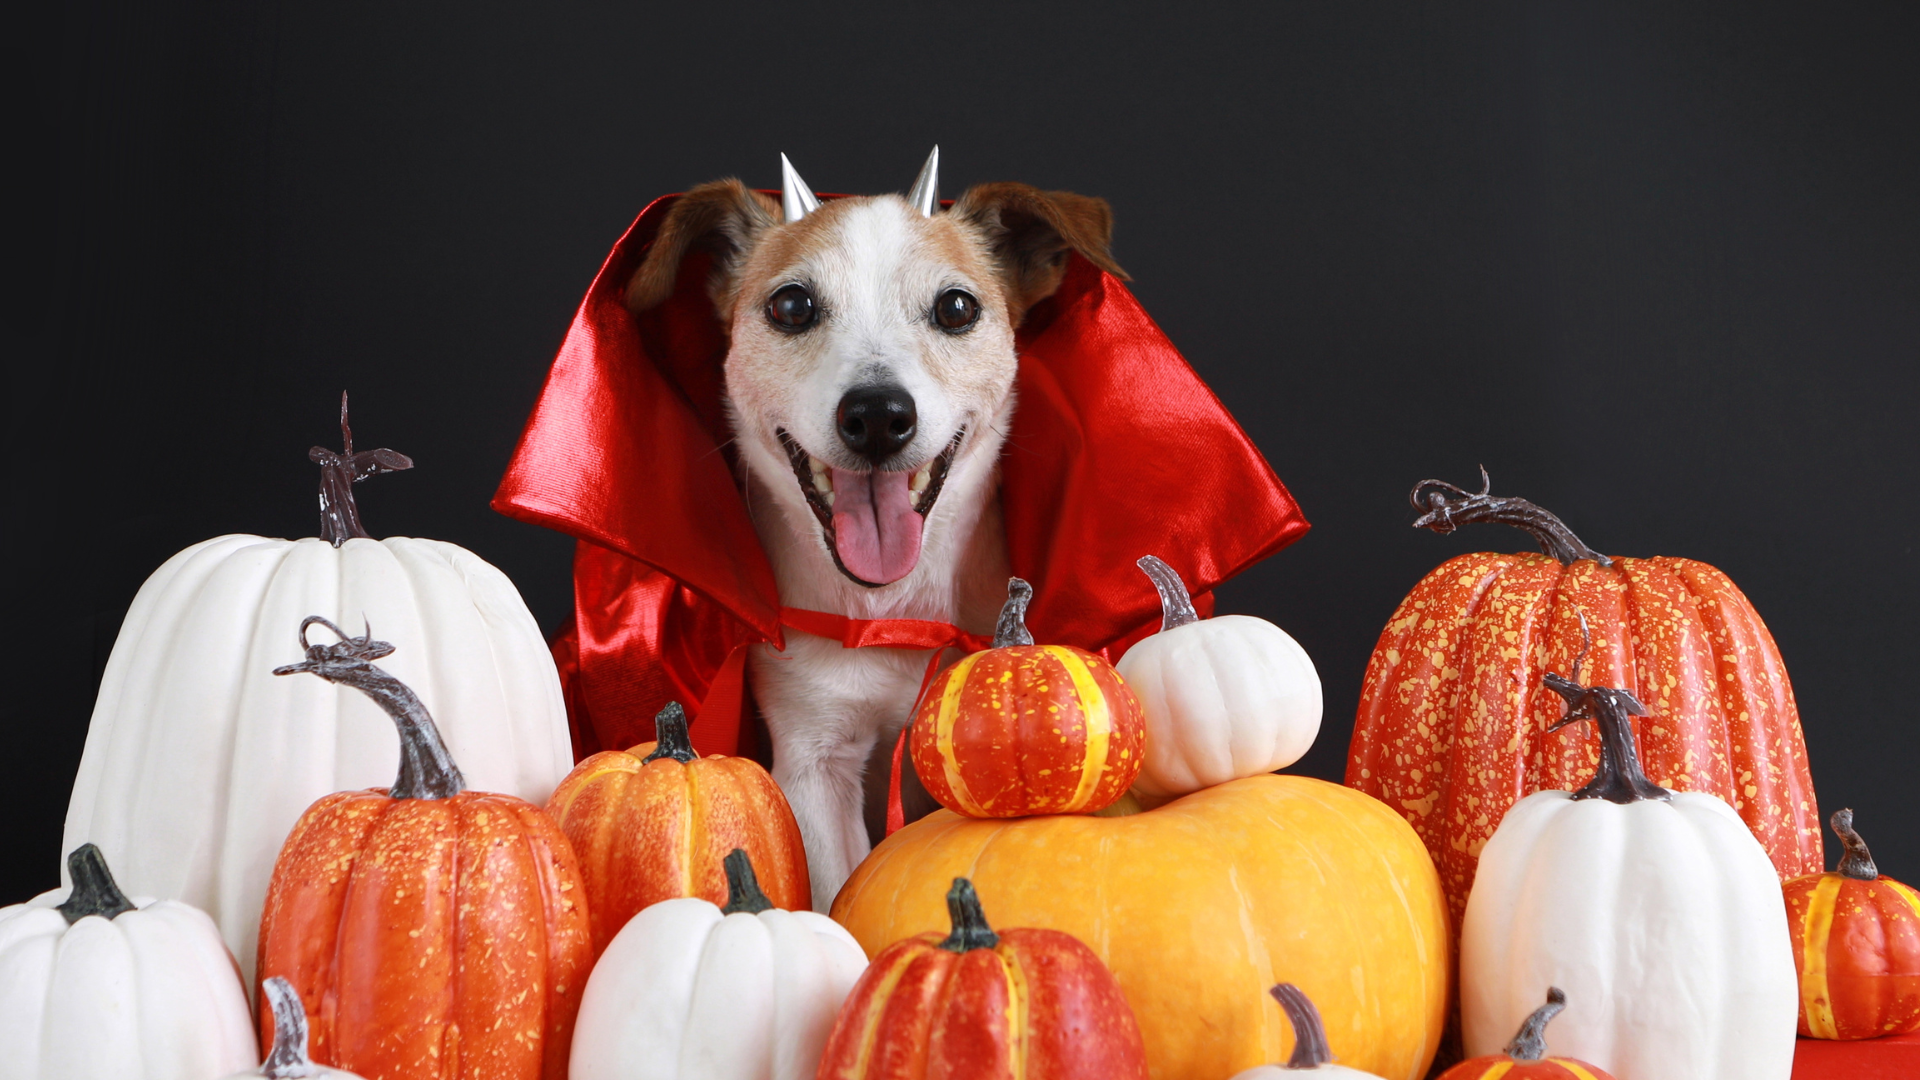 Ideas for dog Halloween costumes